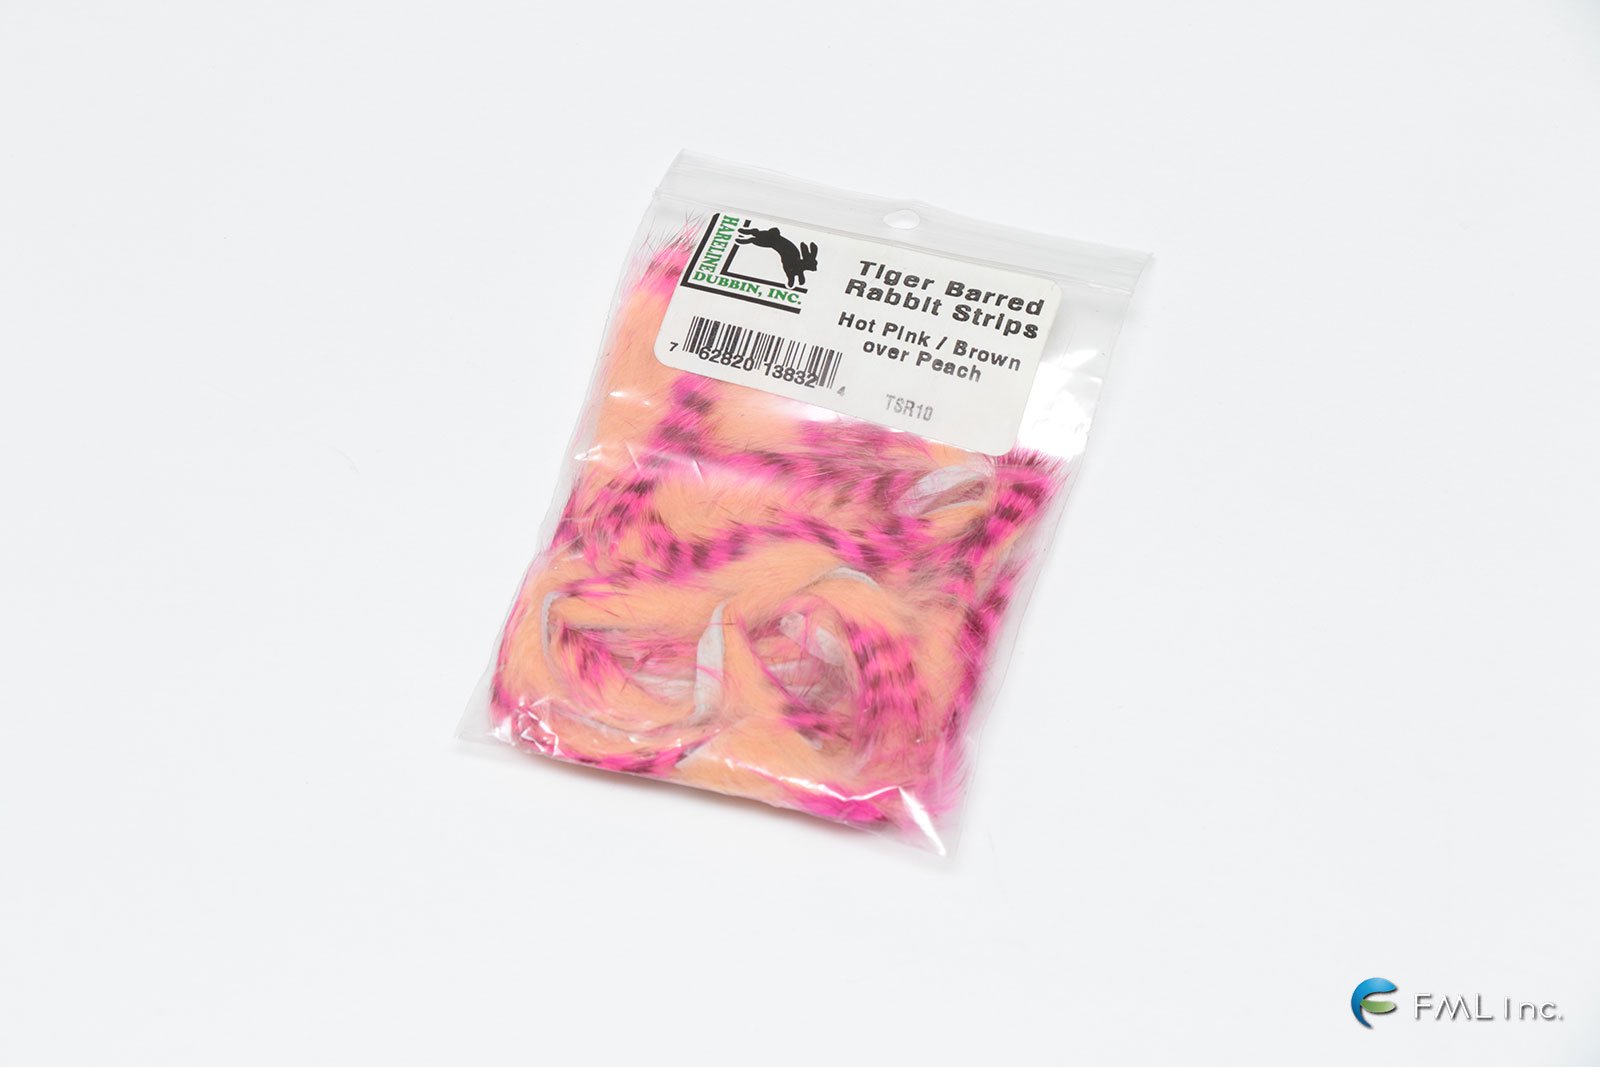 <img class='new_mark_img1' src='https://img.shop-pro.jp/img/new/icons5.gif' style='border:none;display:inline;margin:0px;padding:0px;width:auto;' />HARELINE DUBBIN Tiger Barred Rabbit Strips - Hot Pink / Brown over Peach (TSR10)